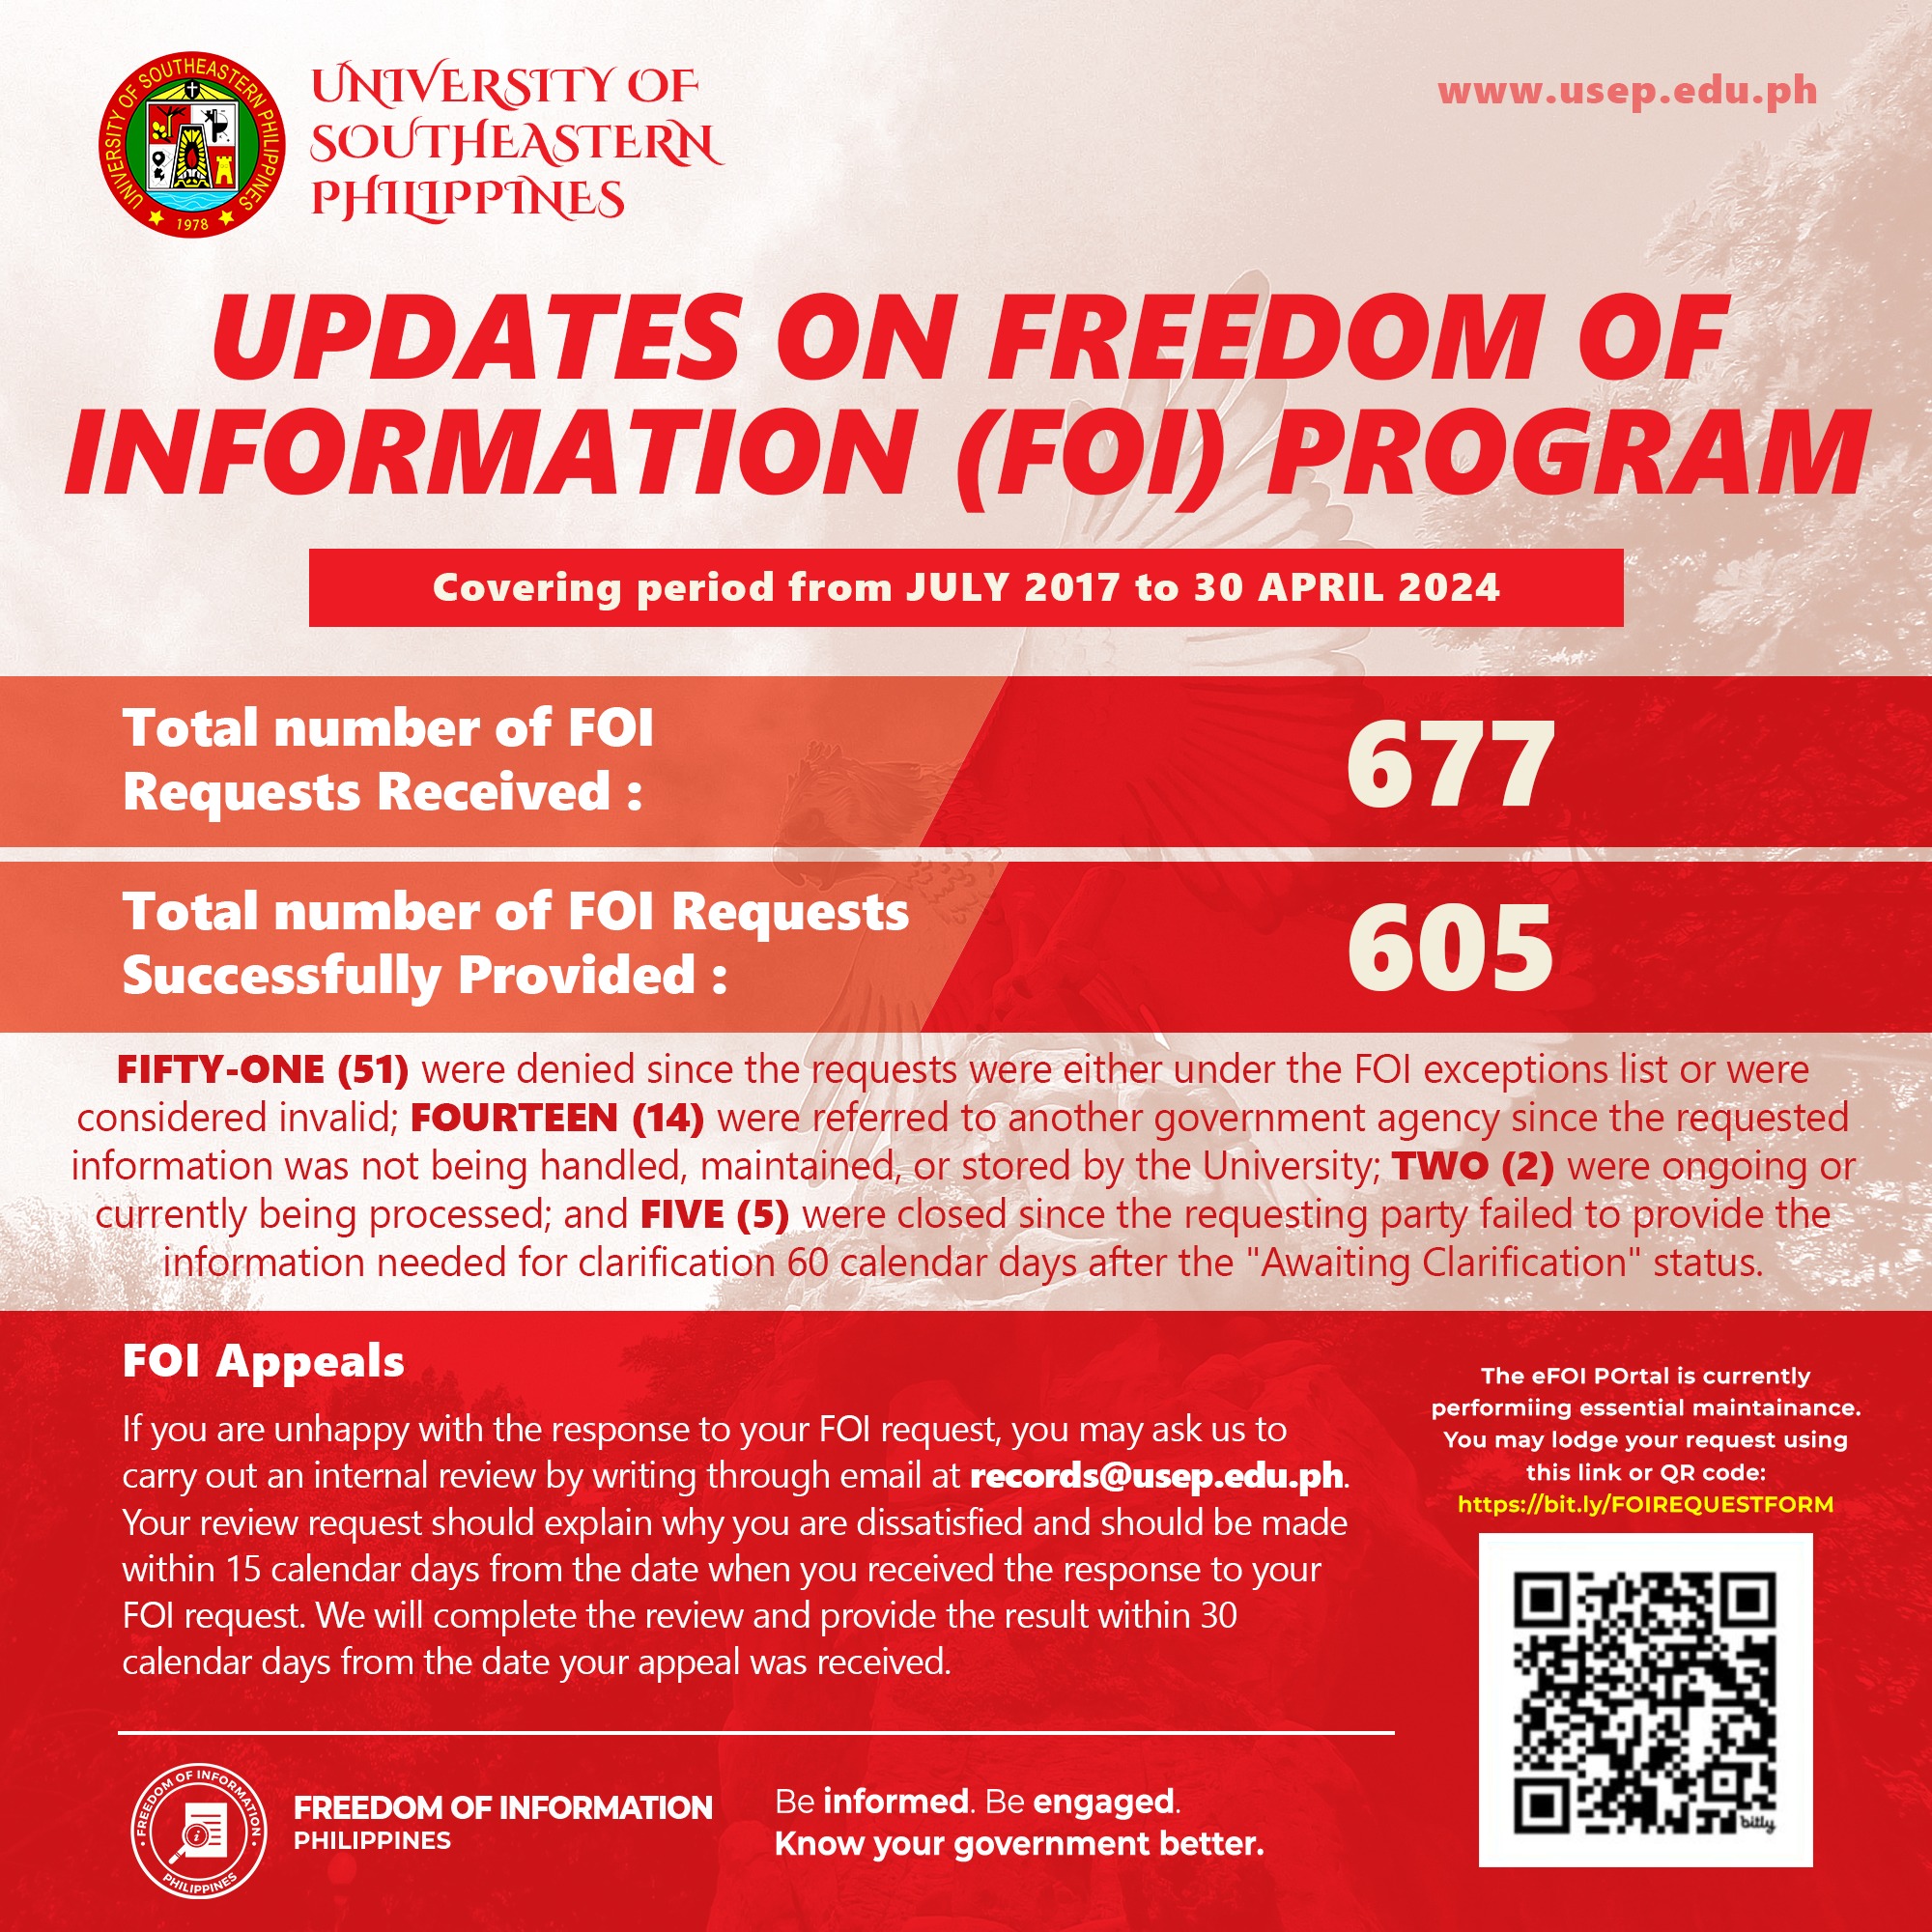 USeP Freedom of Information Update